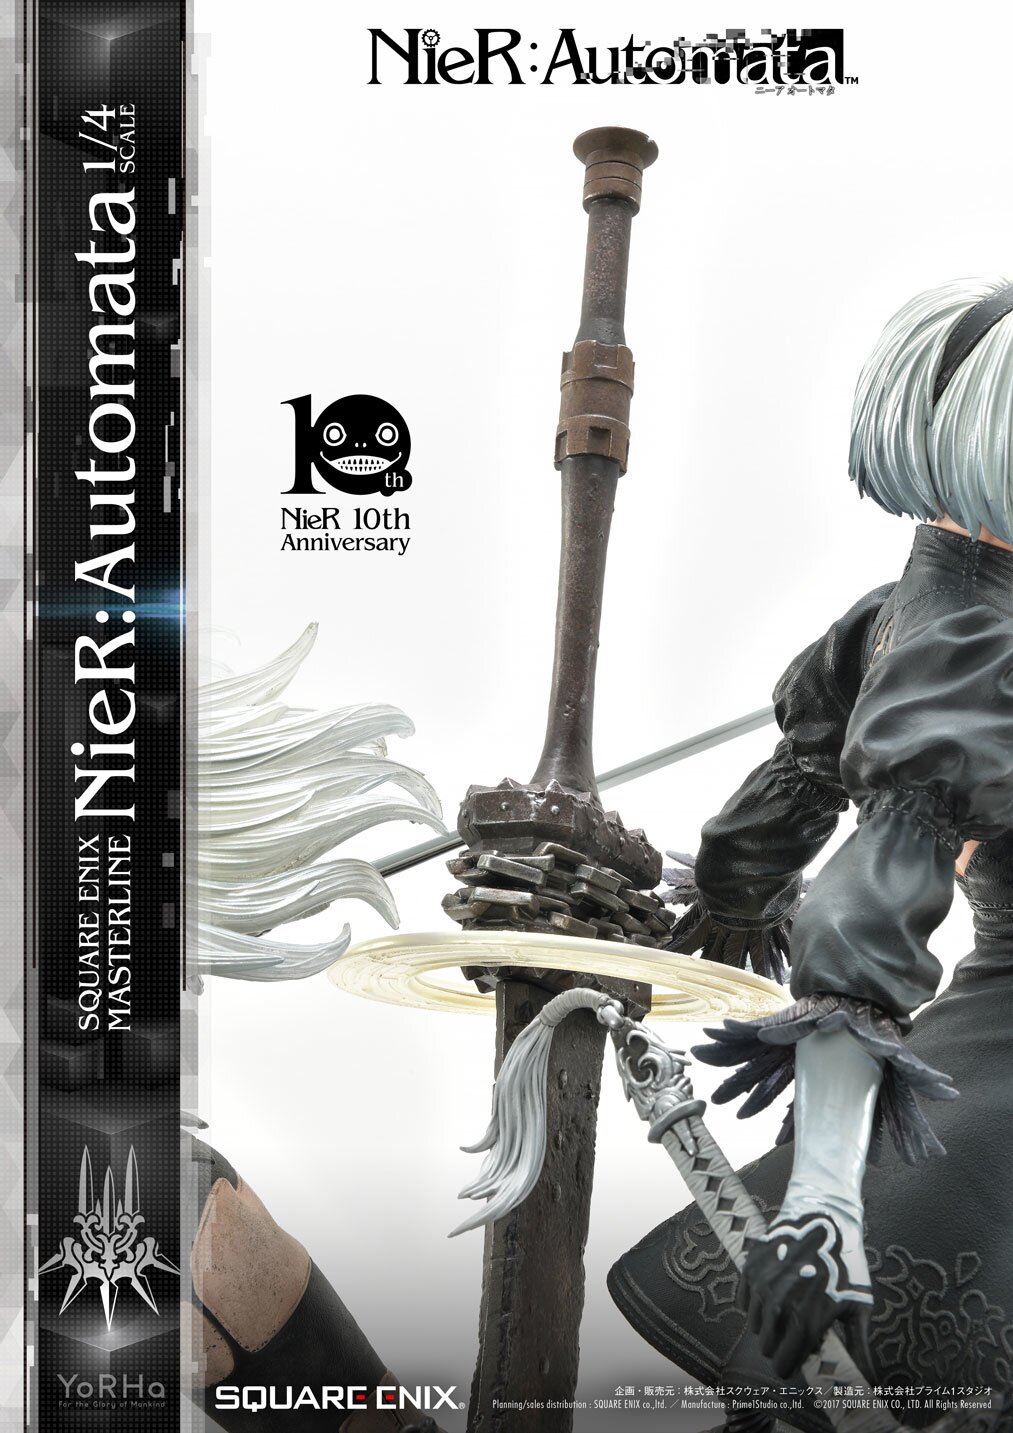 NieR: Automata Masterline Statue Featuring 2B, 9S, and A2 Revealed by Square  Enix - Siliconera